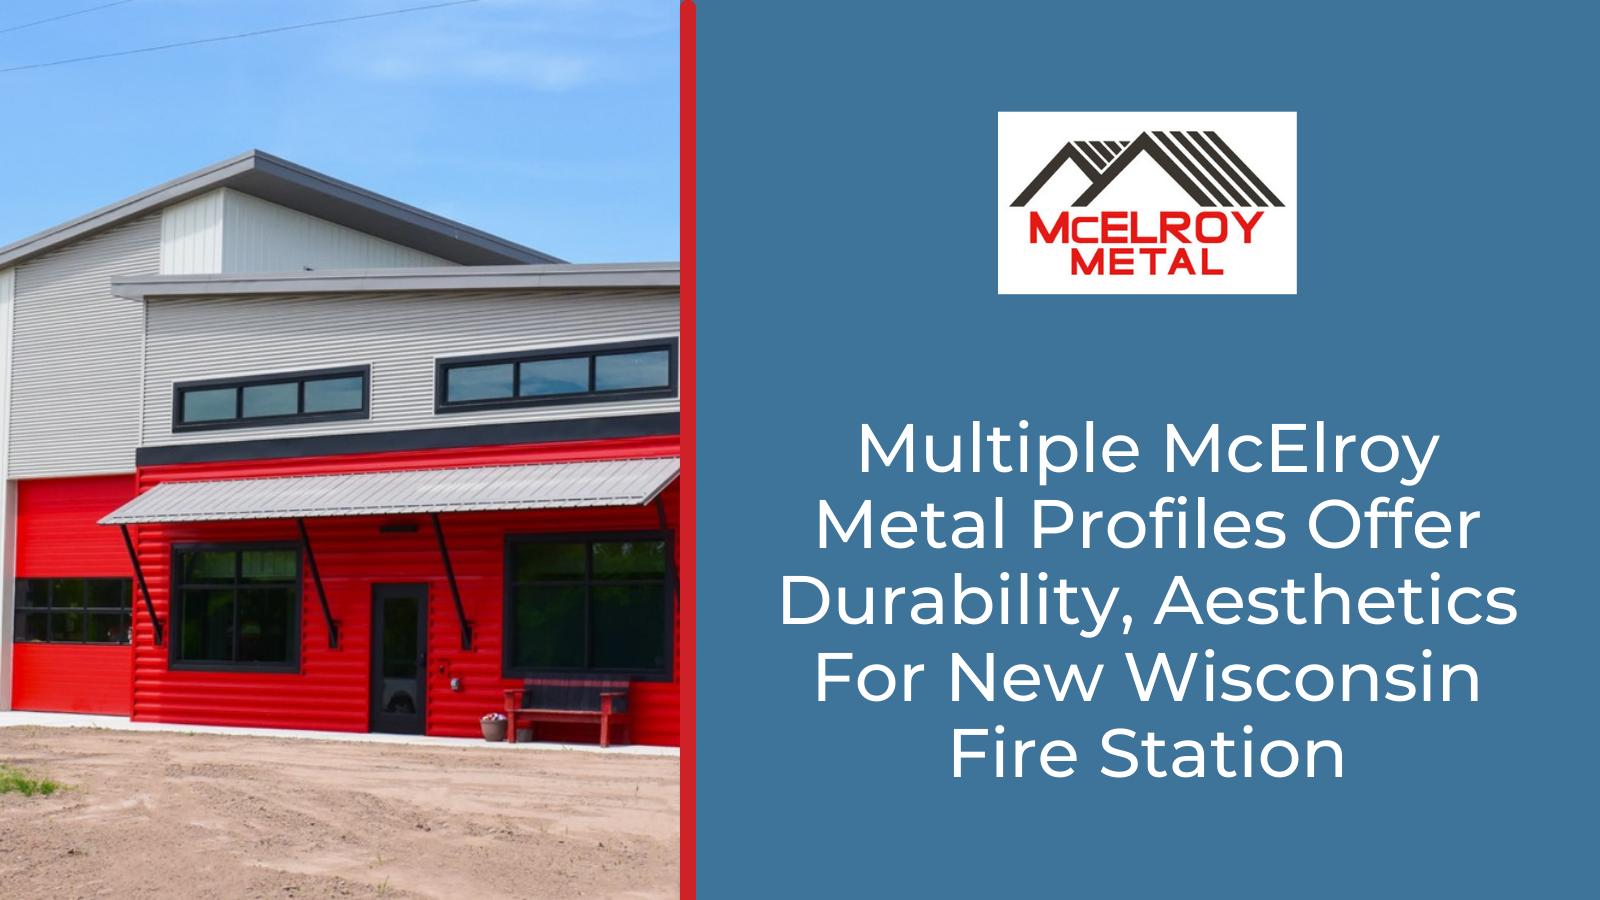 Multiple McElroy Metal Profiles Offer Durability, Aesthetics For New Wisconsin Fire Station